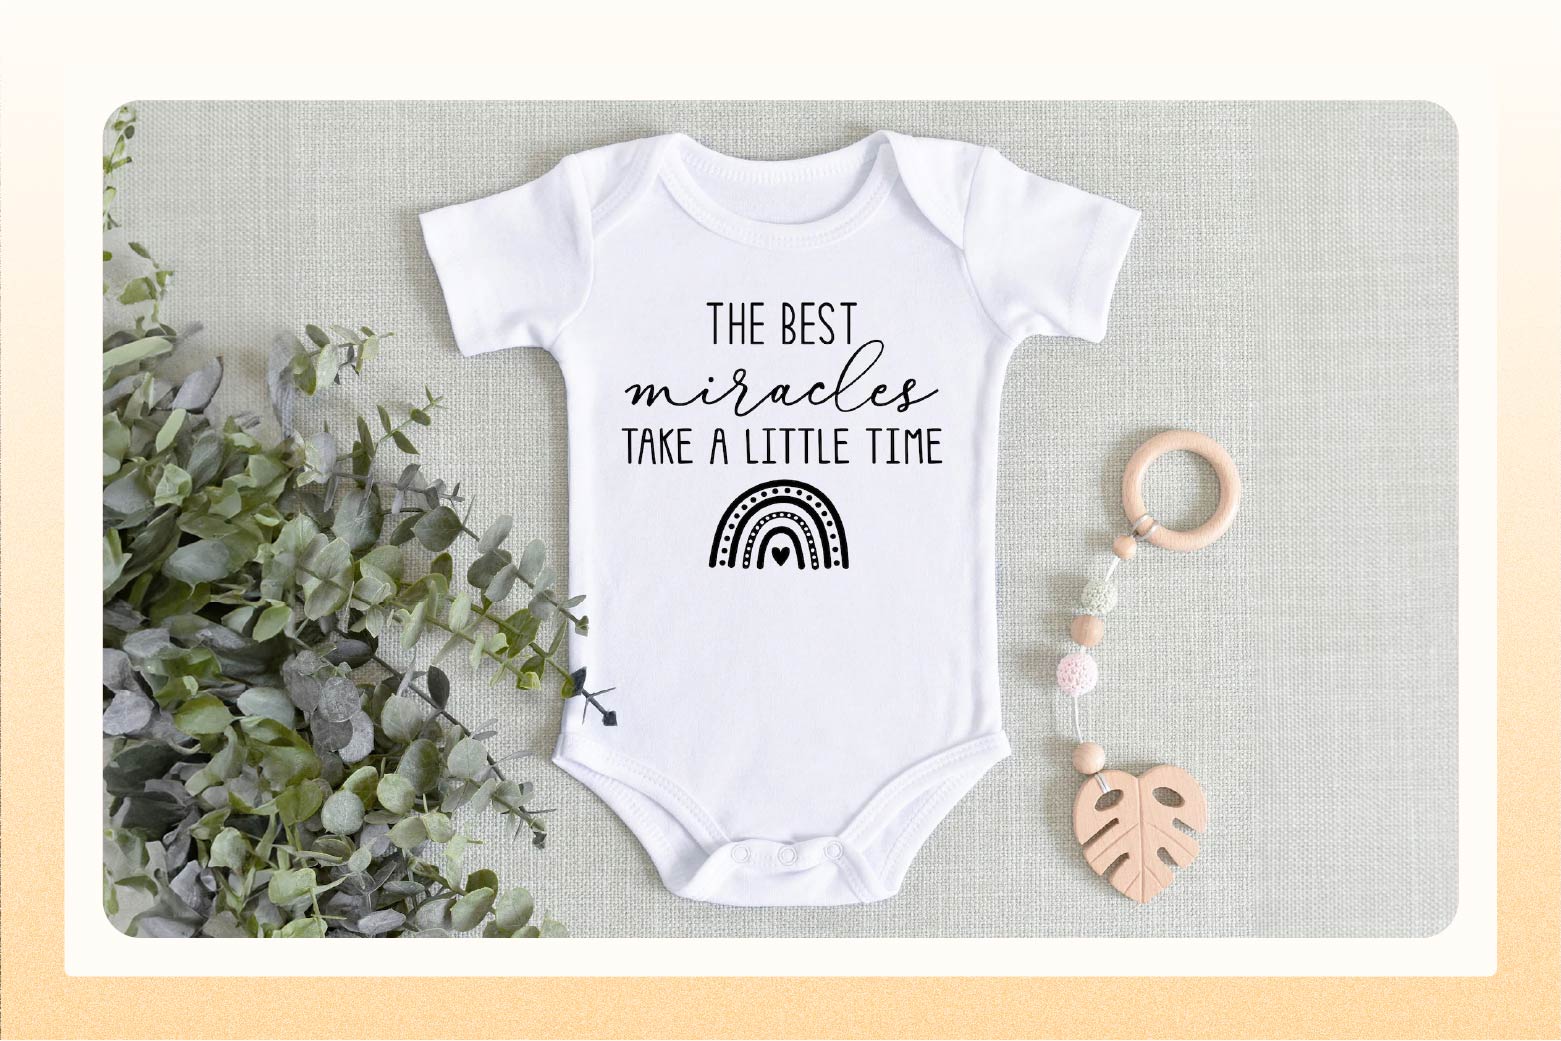 White onesie that says "The best miracles take a little time"